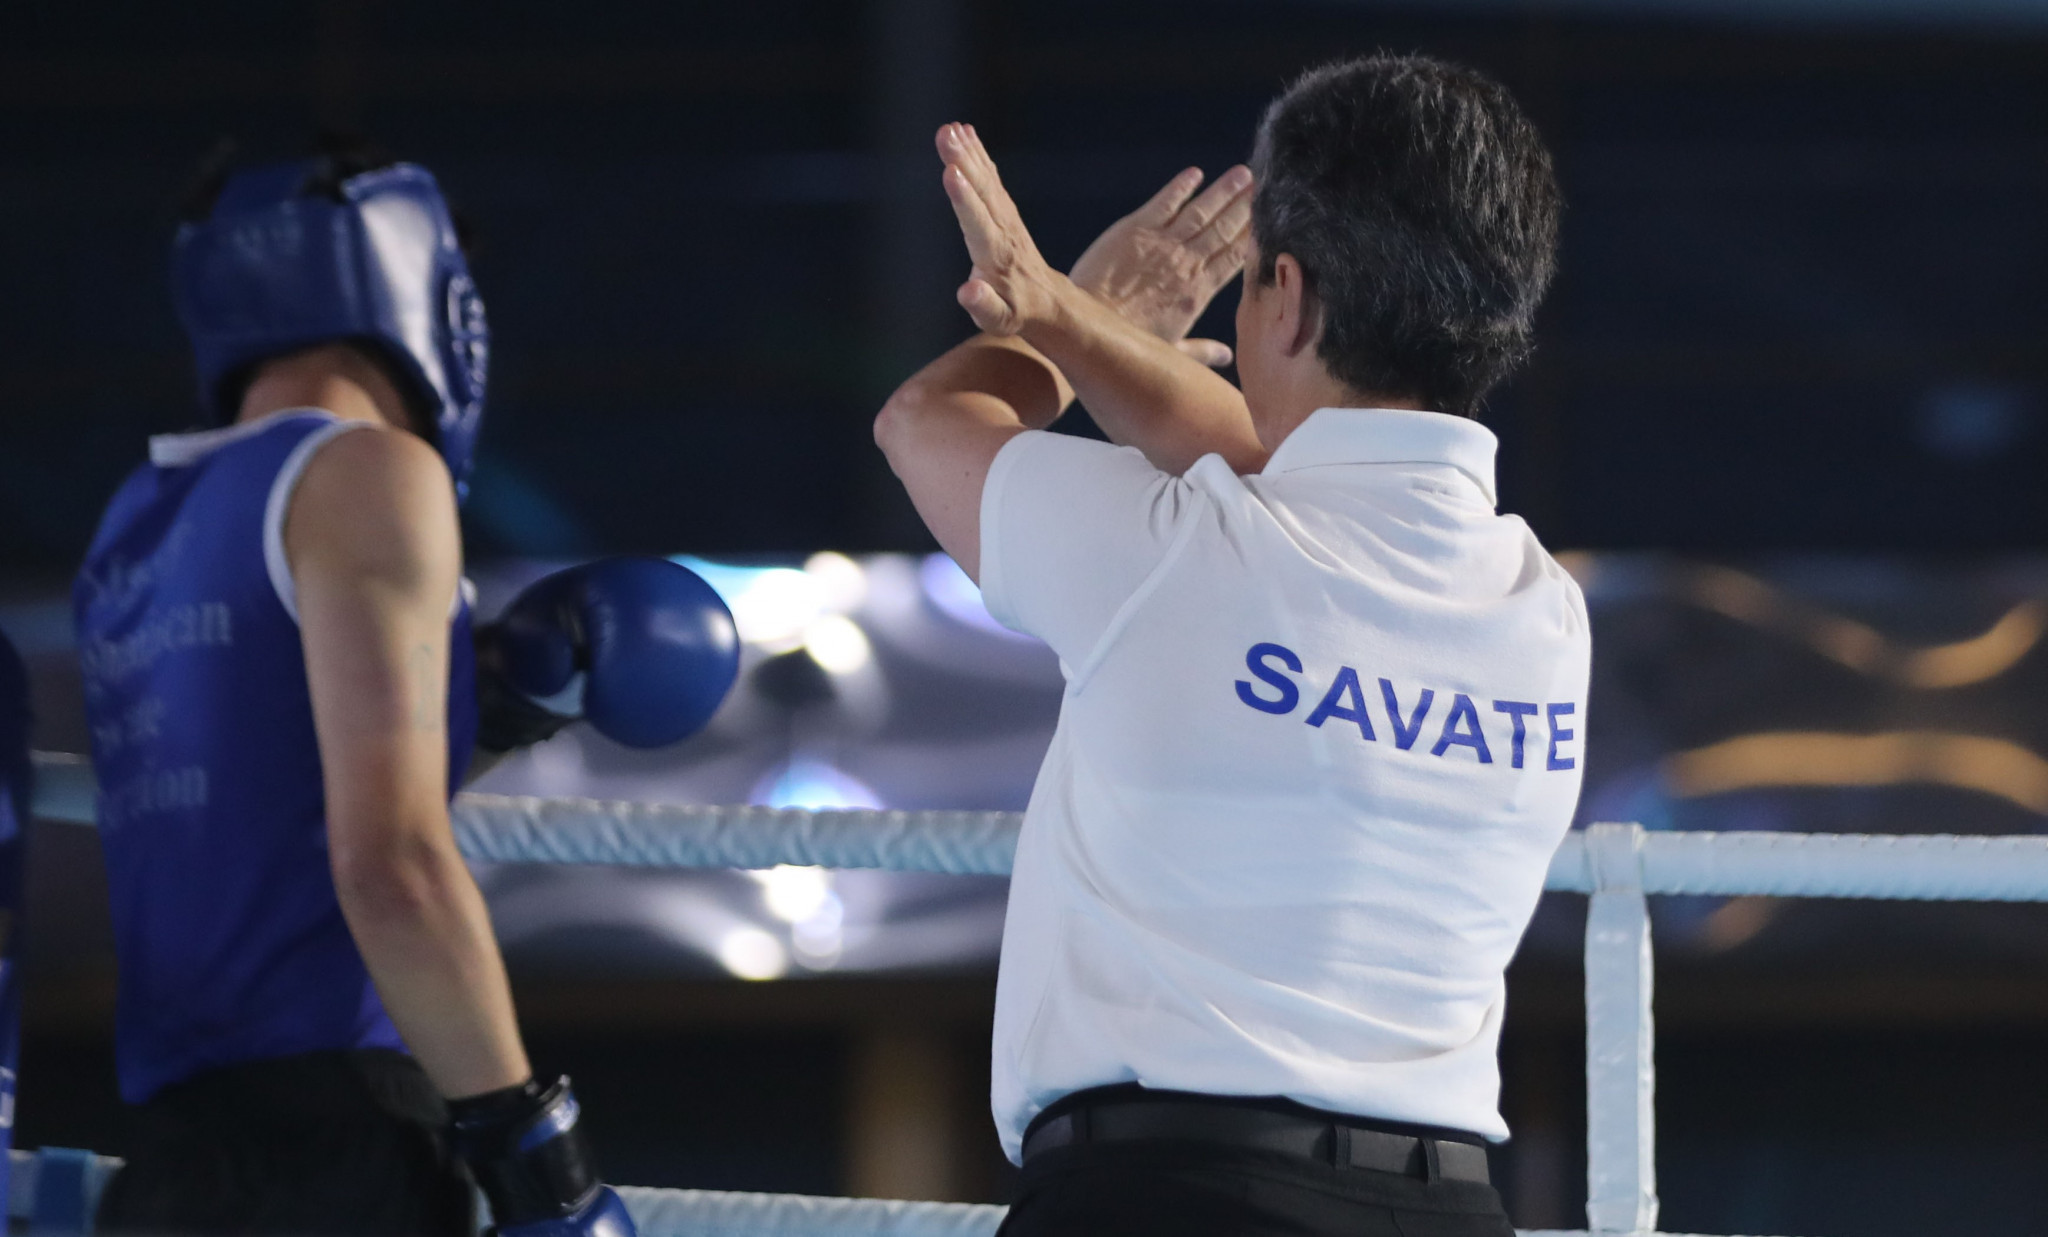 Savate was contested for the first time today at Riyadh 2023 ©Riyadh 2023